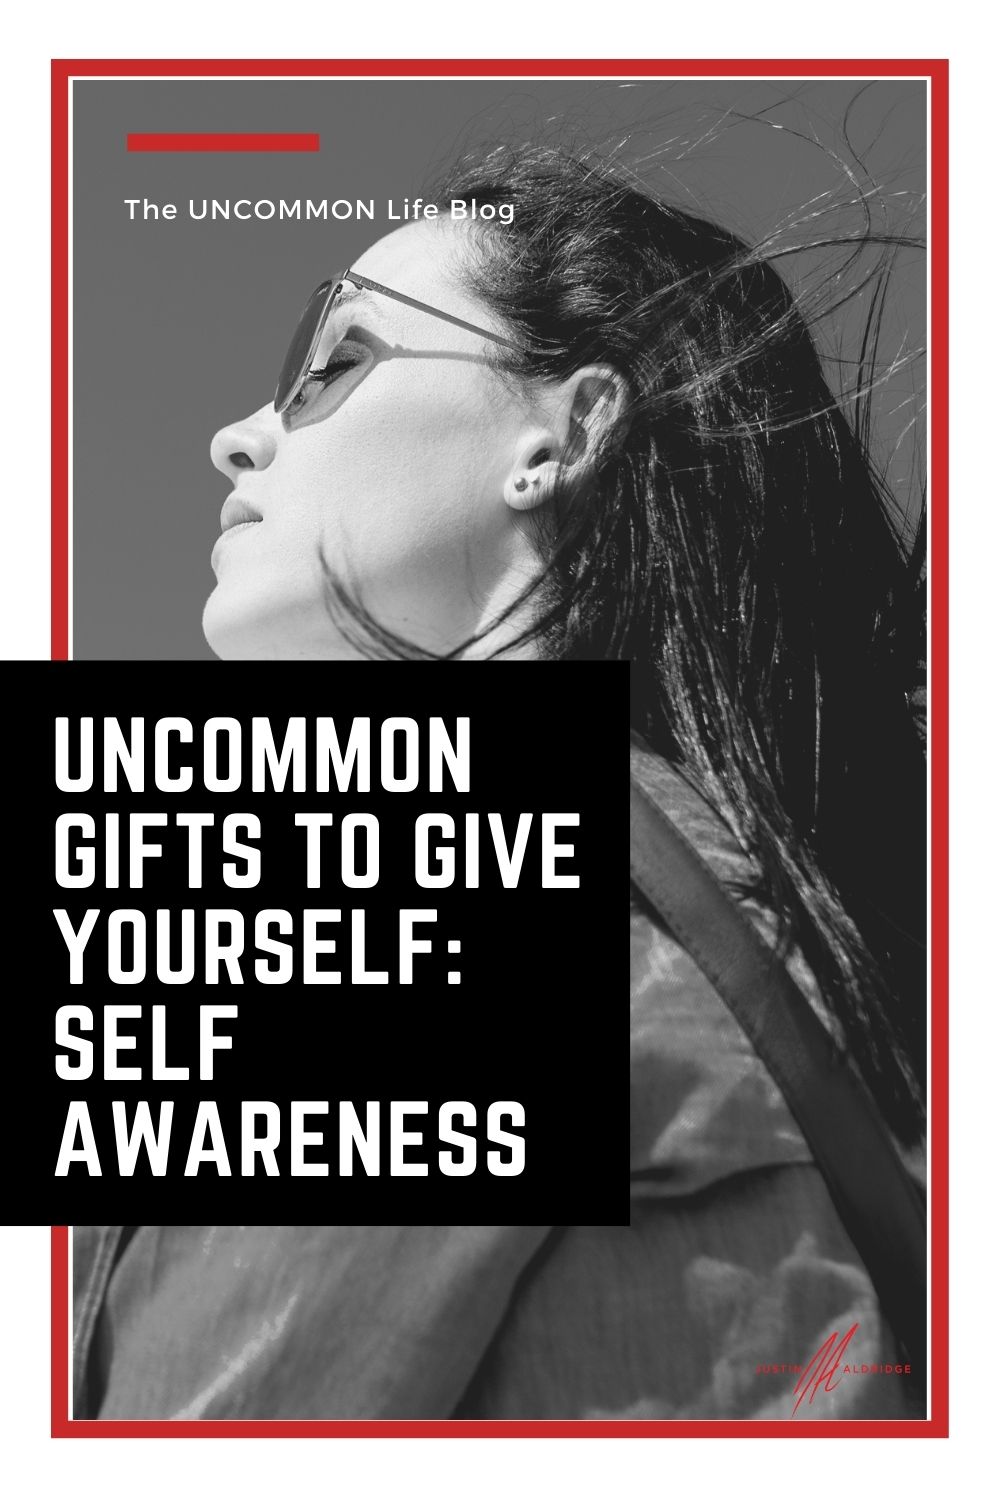 Black and white picture of a woman wearing sun glasses facing the left with the words "UNCOMMON Gifts to give yourself: Self Awareness" in white font